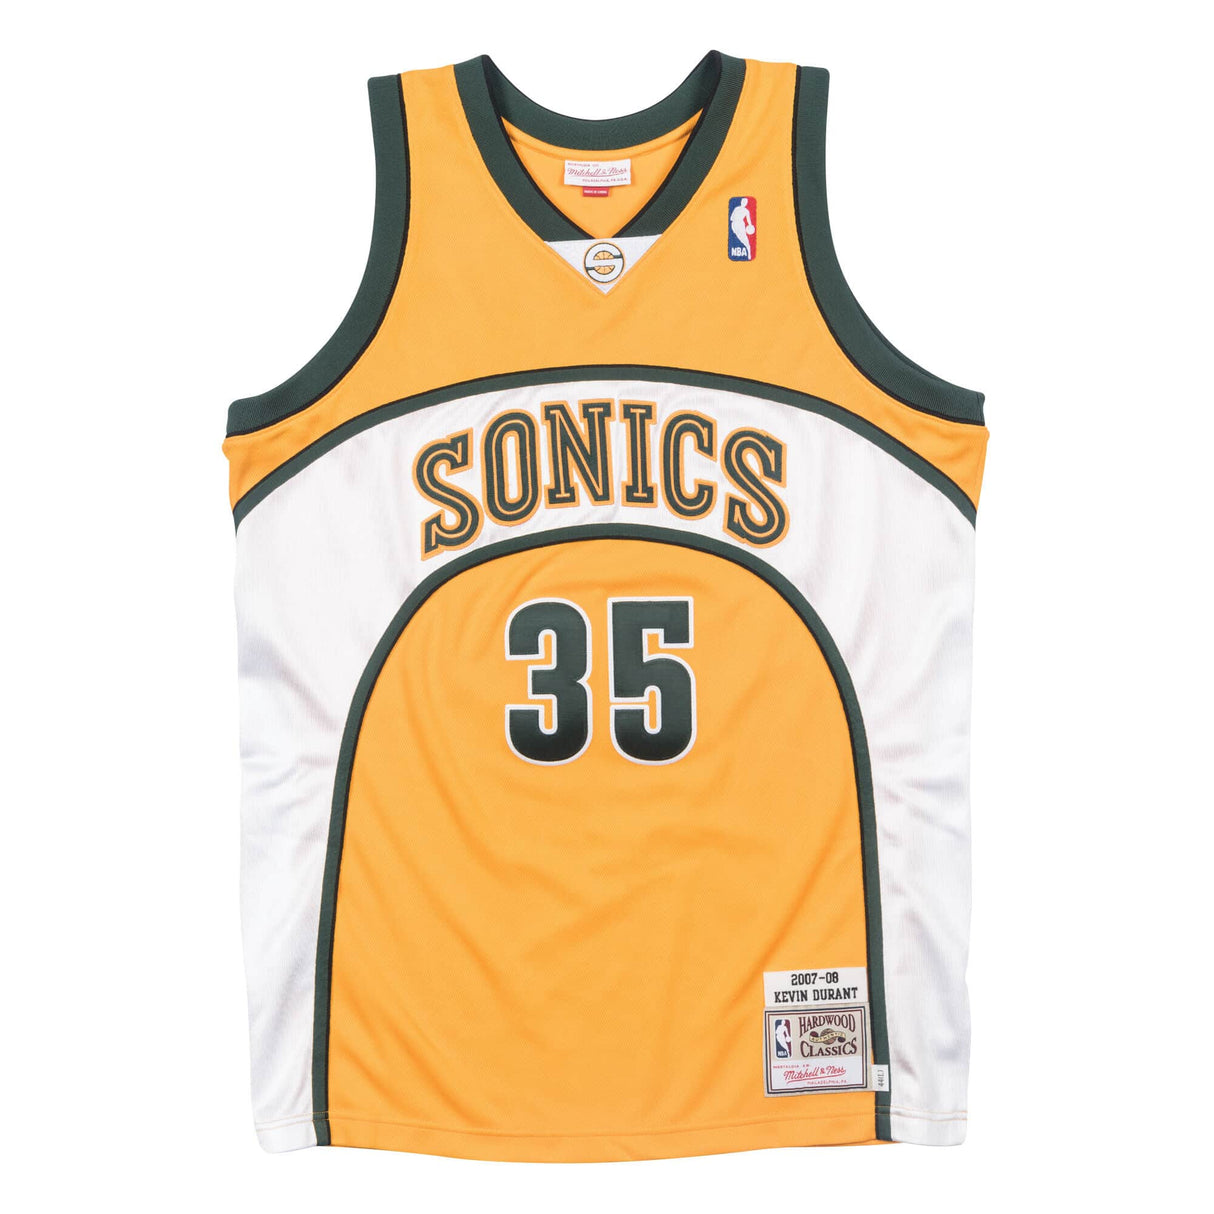 Kevin Durant Seattle Supersonics (Sonics) Jersey - Jersey and Sneakers